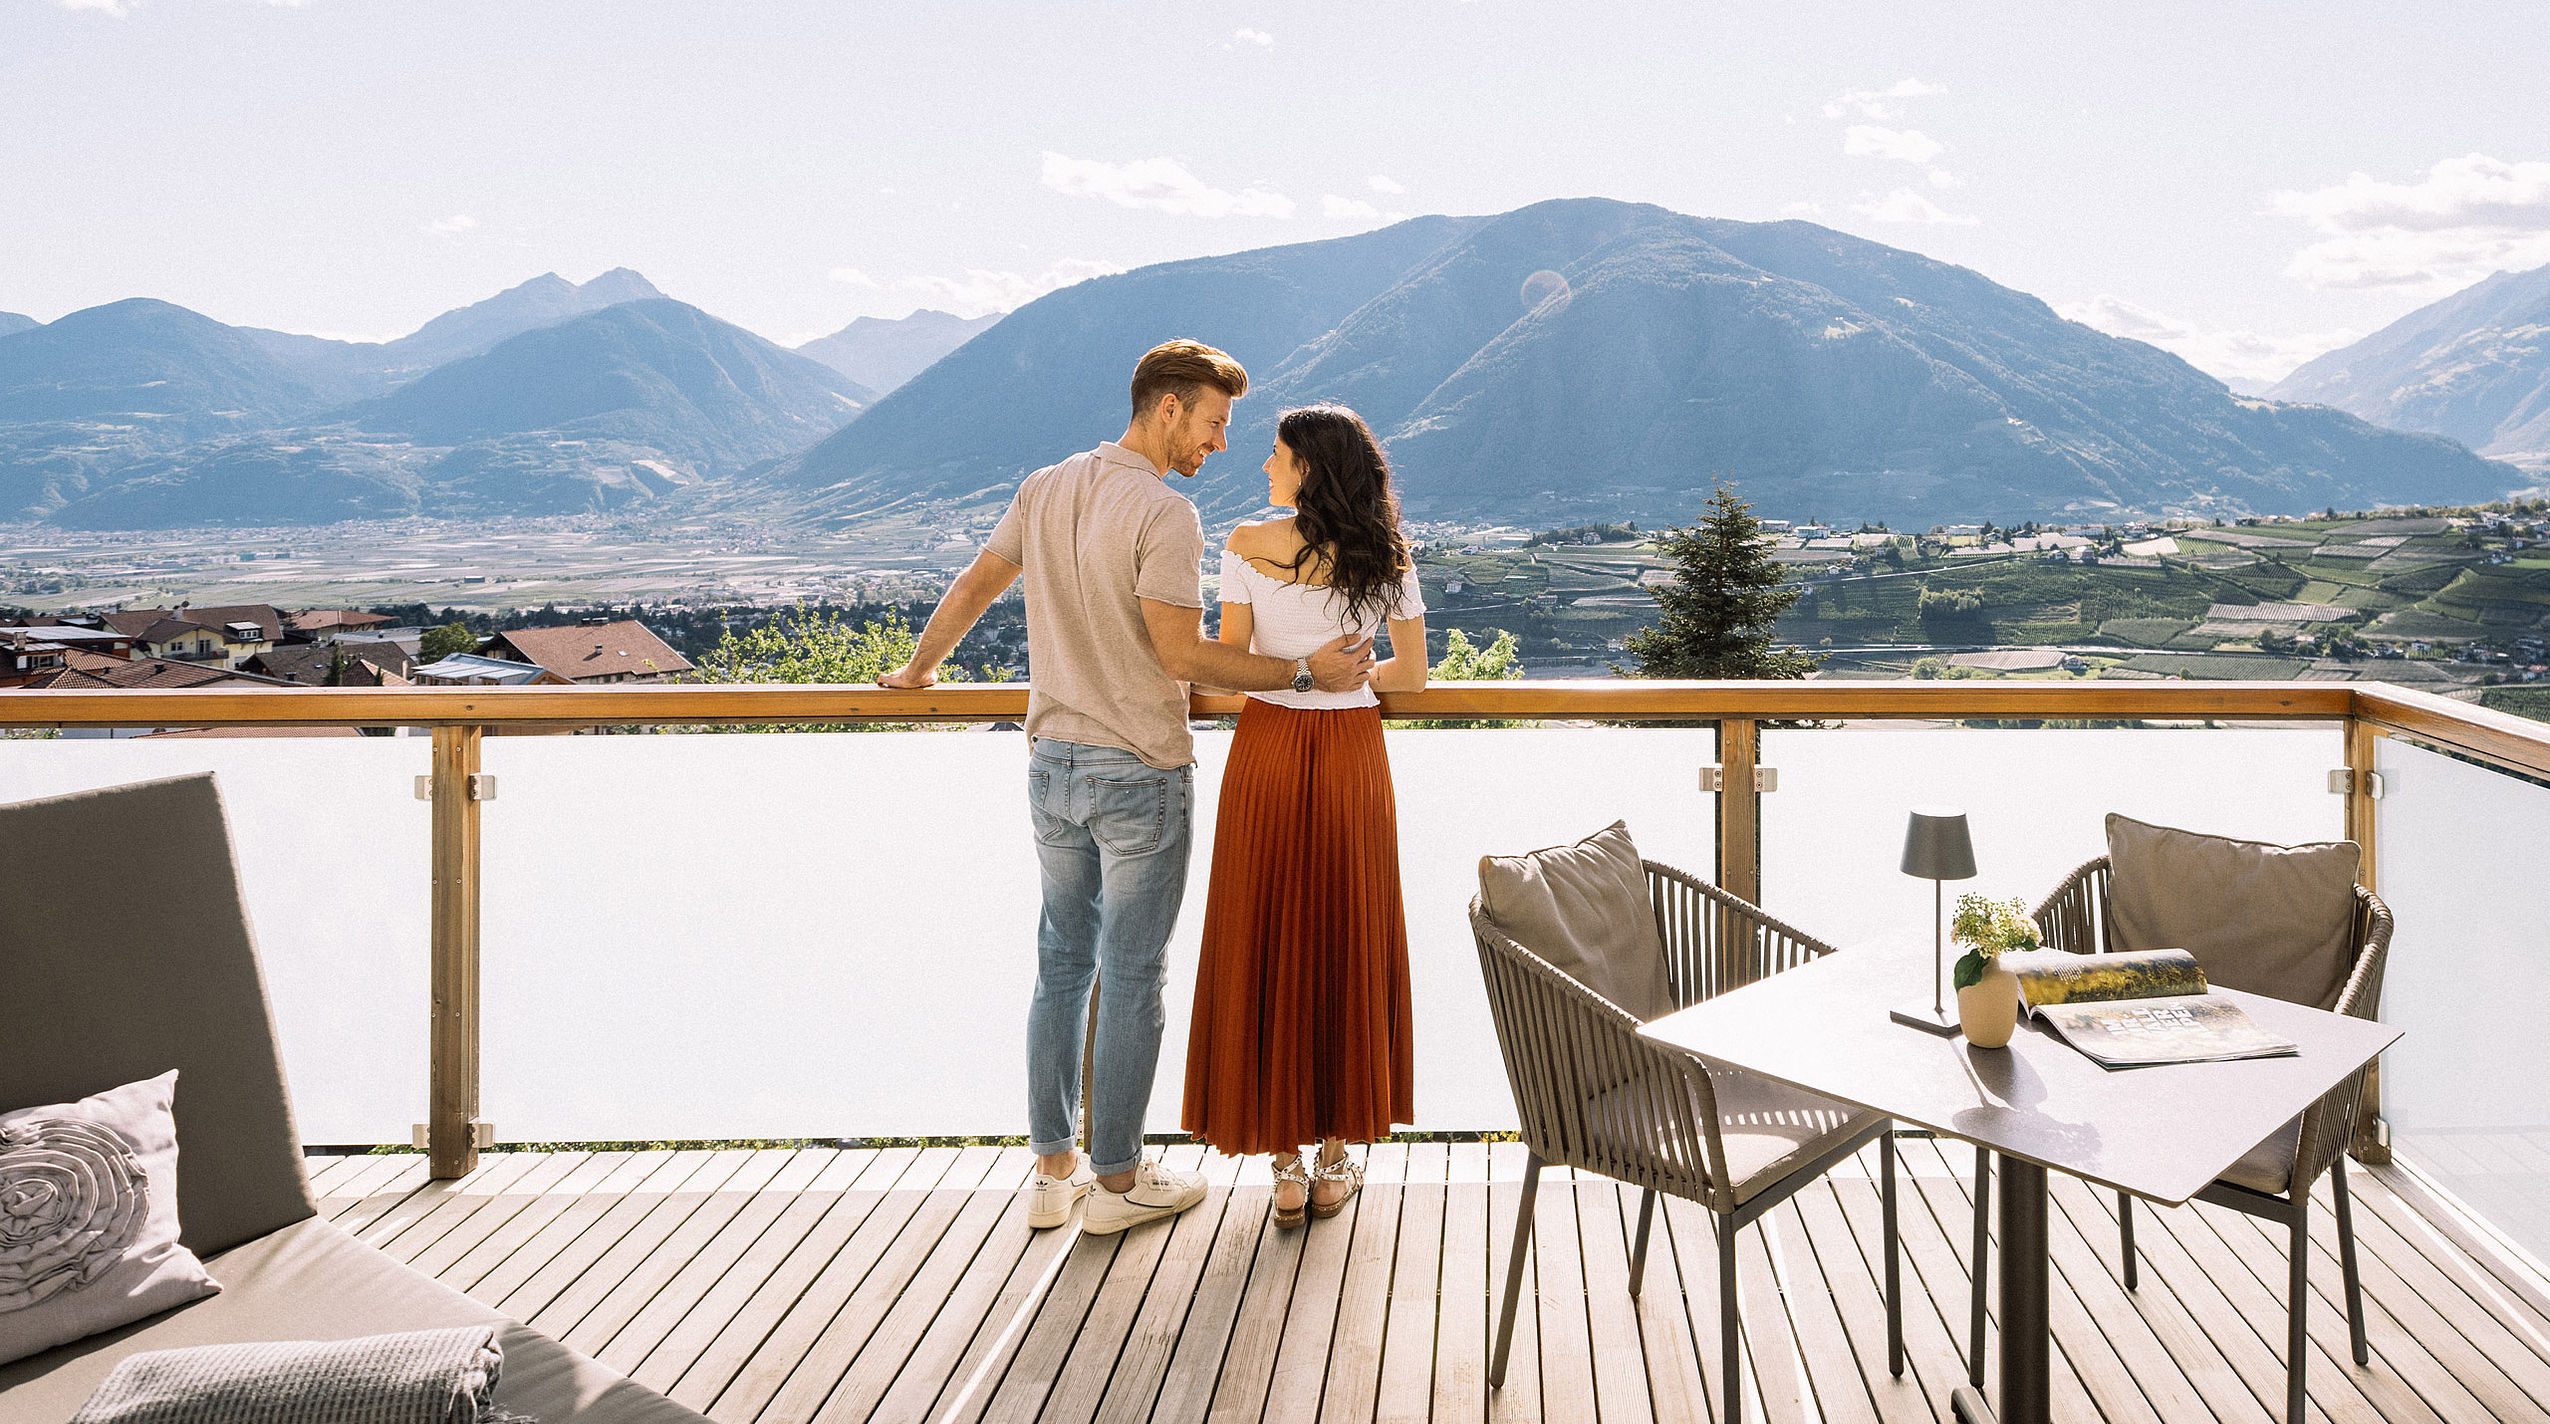 Couple enjoying the view of the mountains on the terrace of the Wellness Hotel